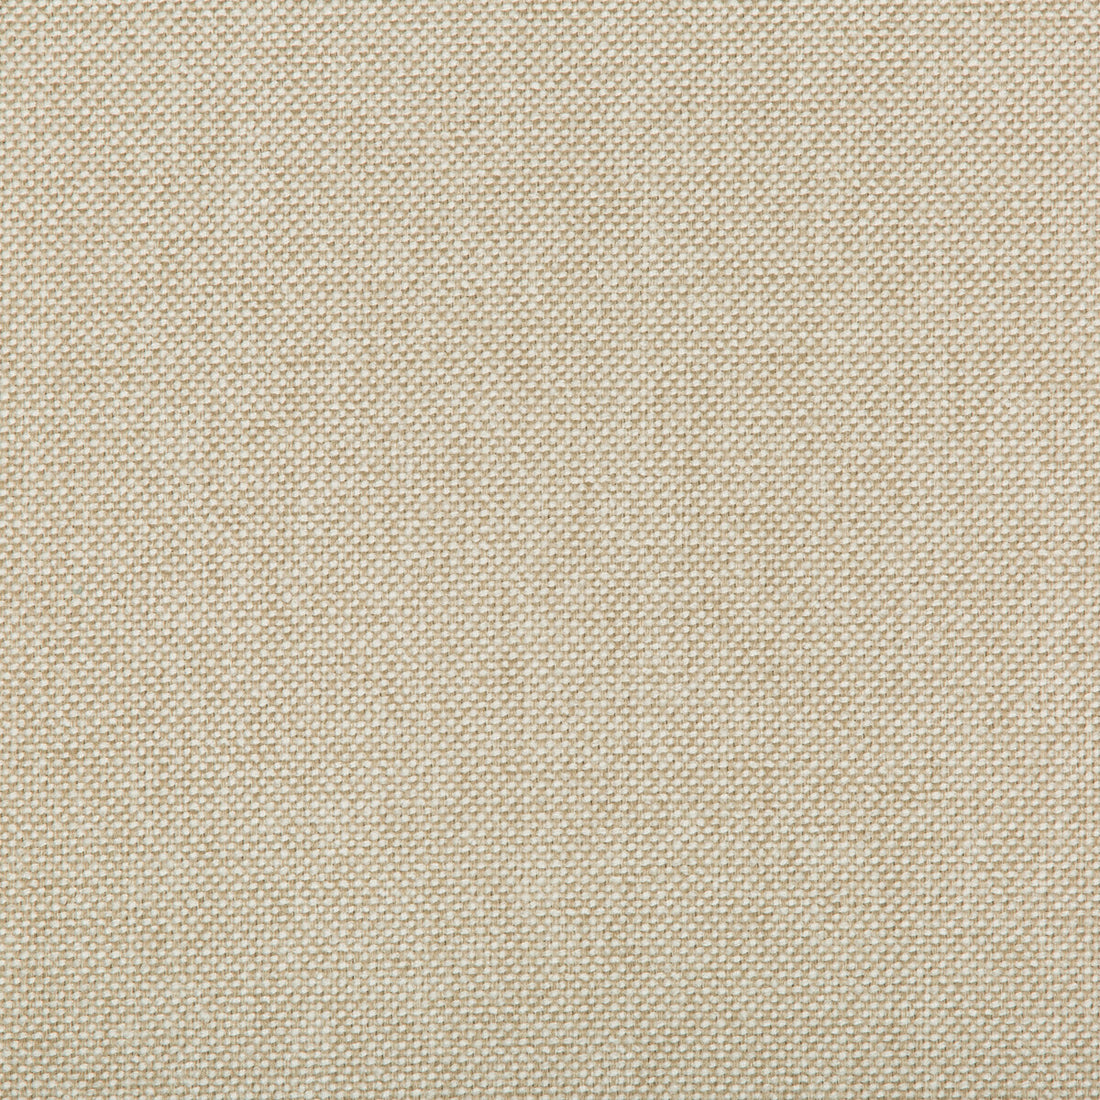 Williams fabric in coconut color - pattern 35744.111.0 - by Kravet Contract in the Value Kravetarmor collection